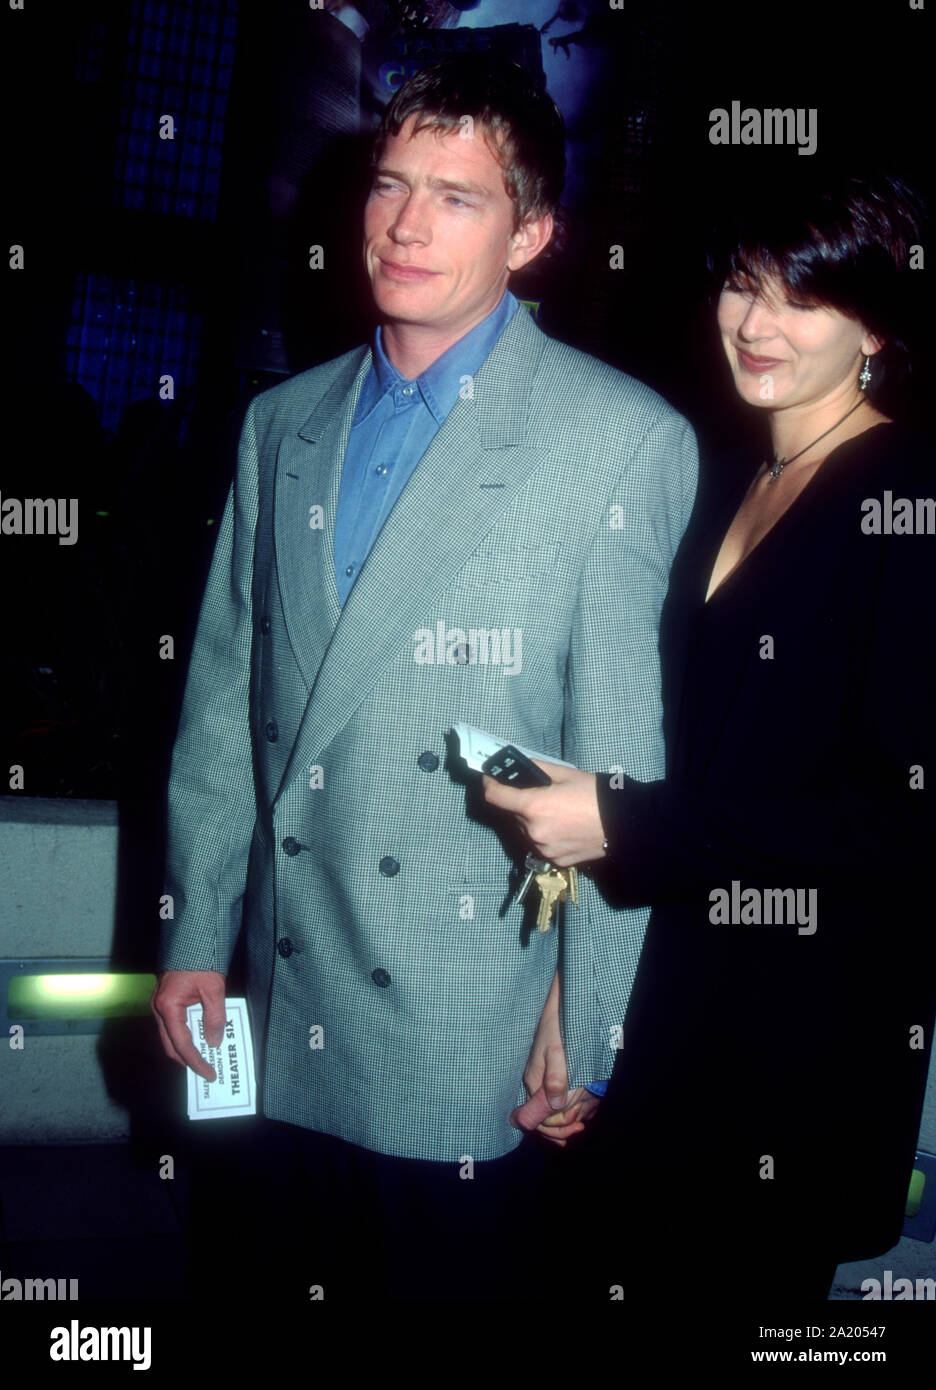 Hollywood, California, USA 11th January 1995 Actor Thomas Haden Church attends 'Tales from the Crypt: Demon Knight' Hollywood Premiere on January 11, 1995 at Hollywood Galaxy Theatre in Hollywood, California, USA. Photo by Barry King/Alamy Stock Photo Stock Photo